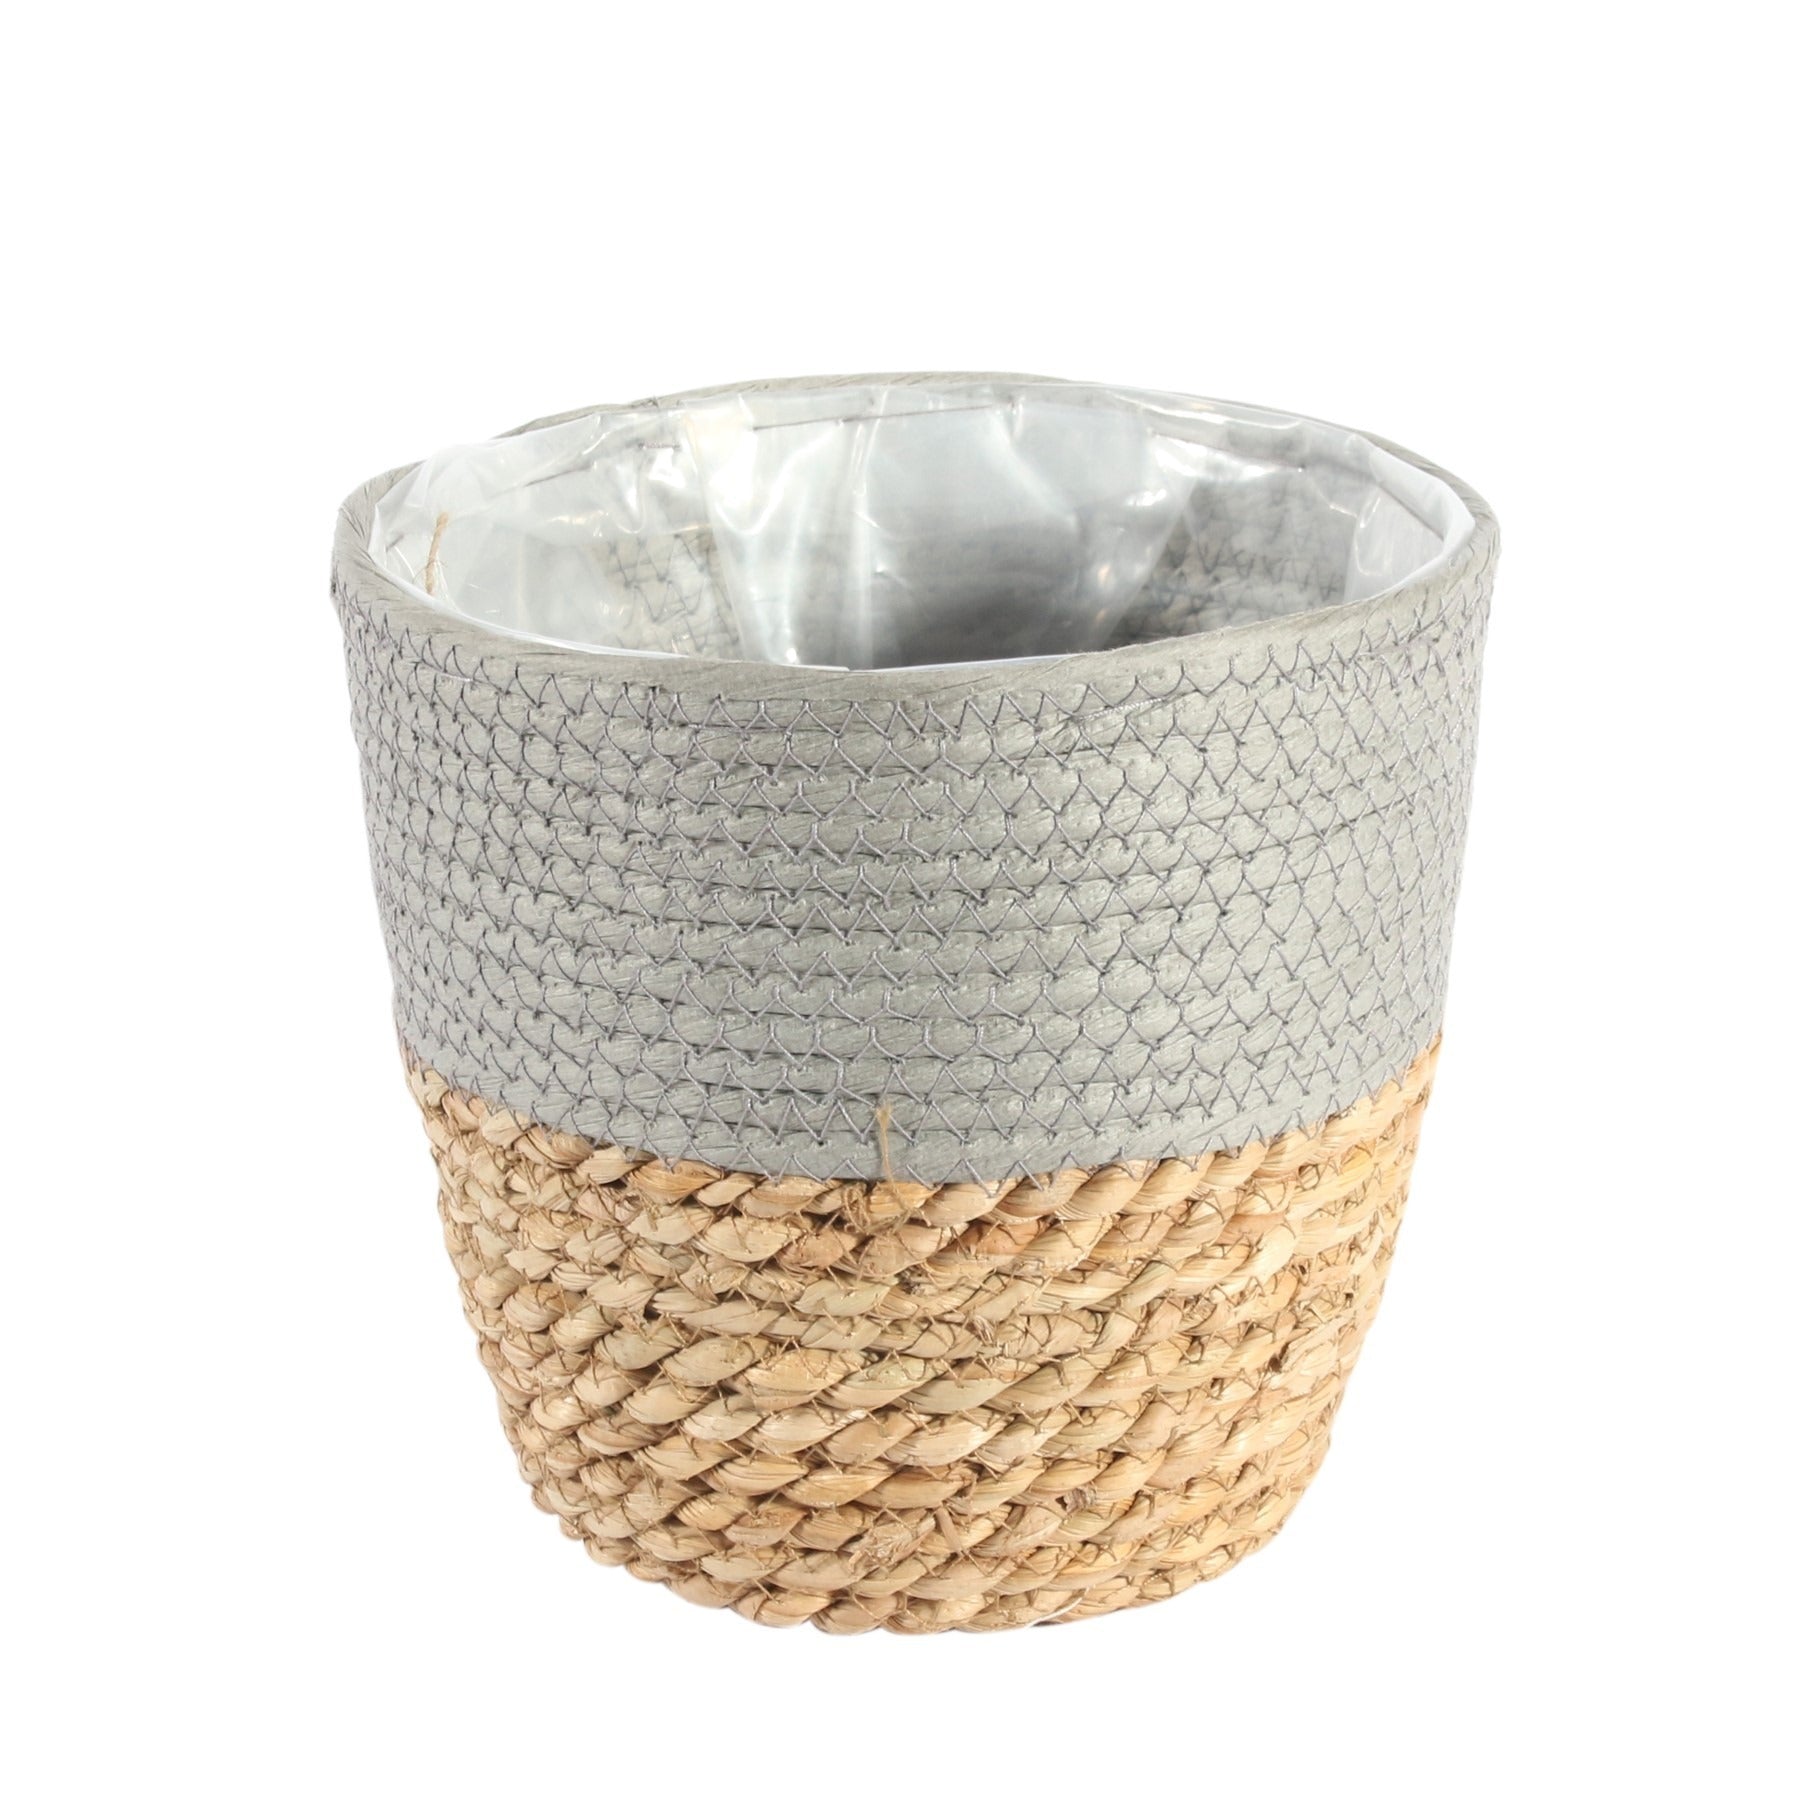 View 19cm Round Two Tone Seagrass and Grey Paper Basket information